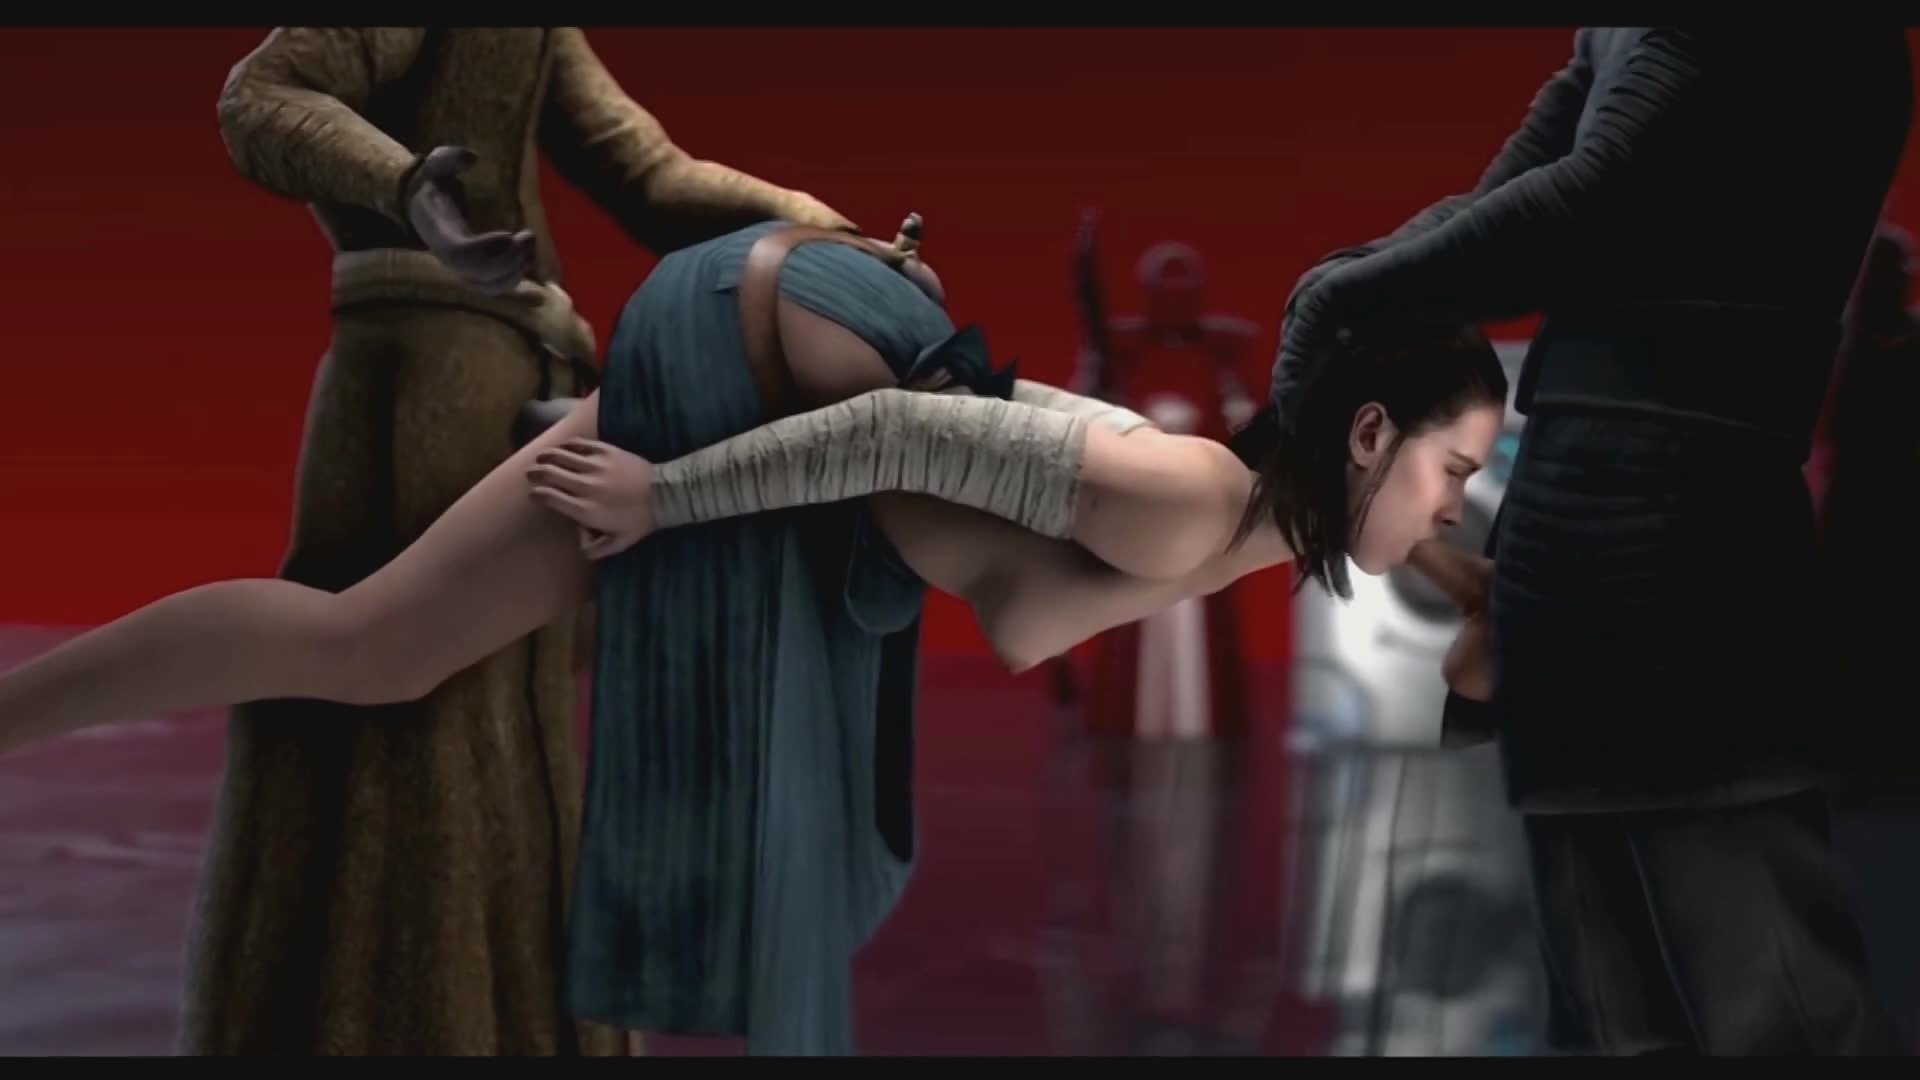 Star Wars Ray Porn - Star Wars 3D Porn Parody - Rey is made to fuck Snoke and Kylo Ren - Hentai  City